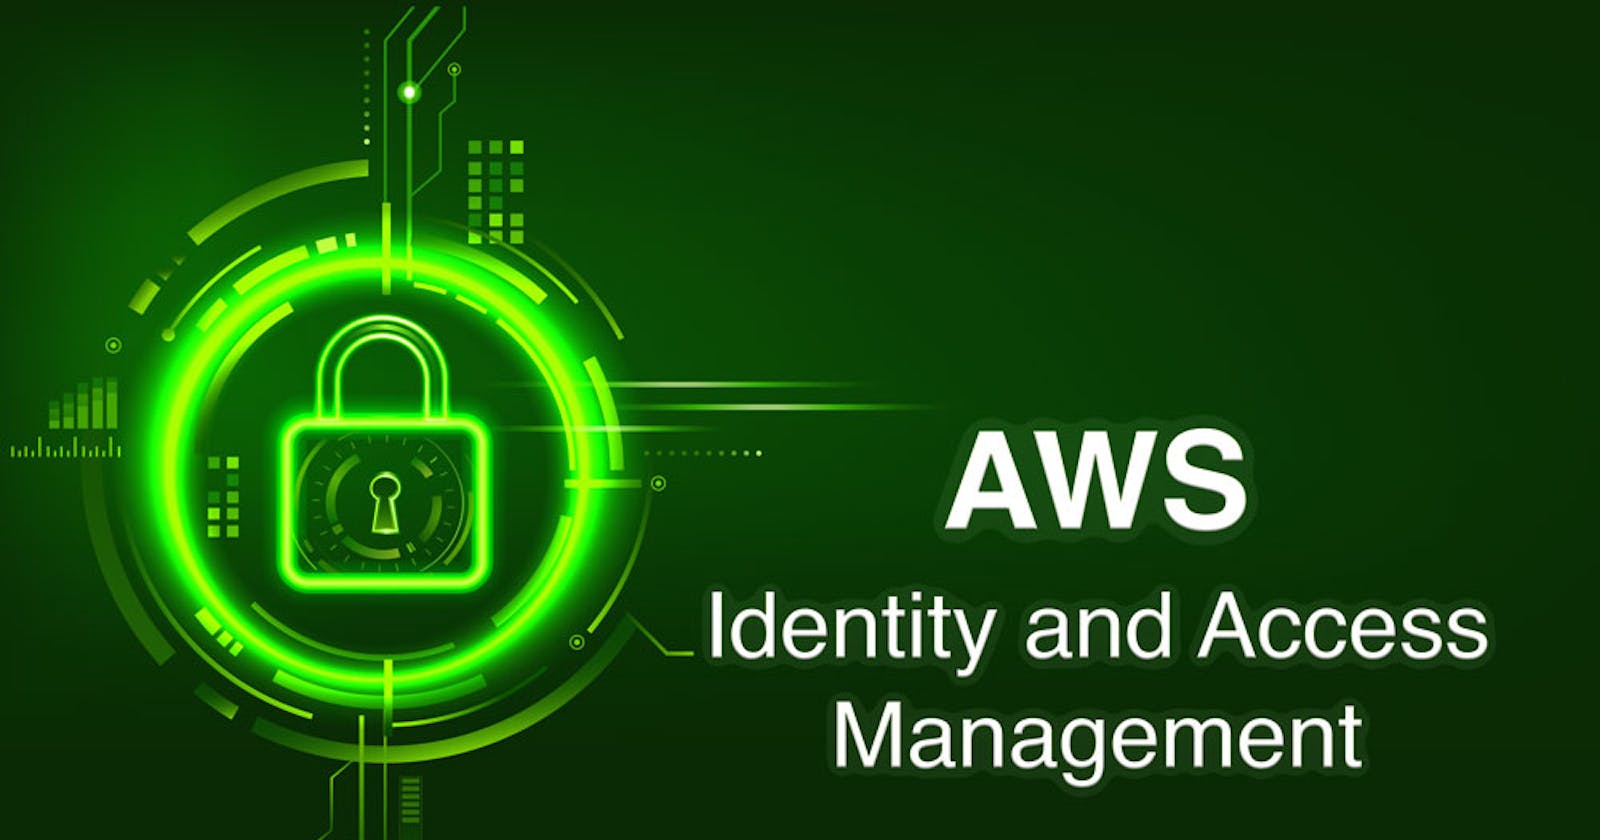 Day 2: Deep Dive into AWS IAM (Identity and Access Management)